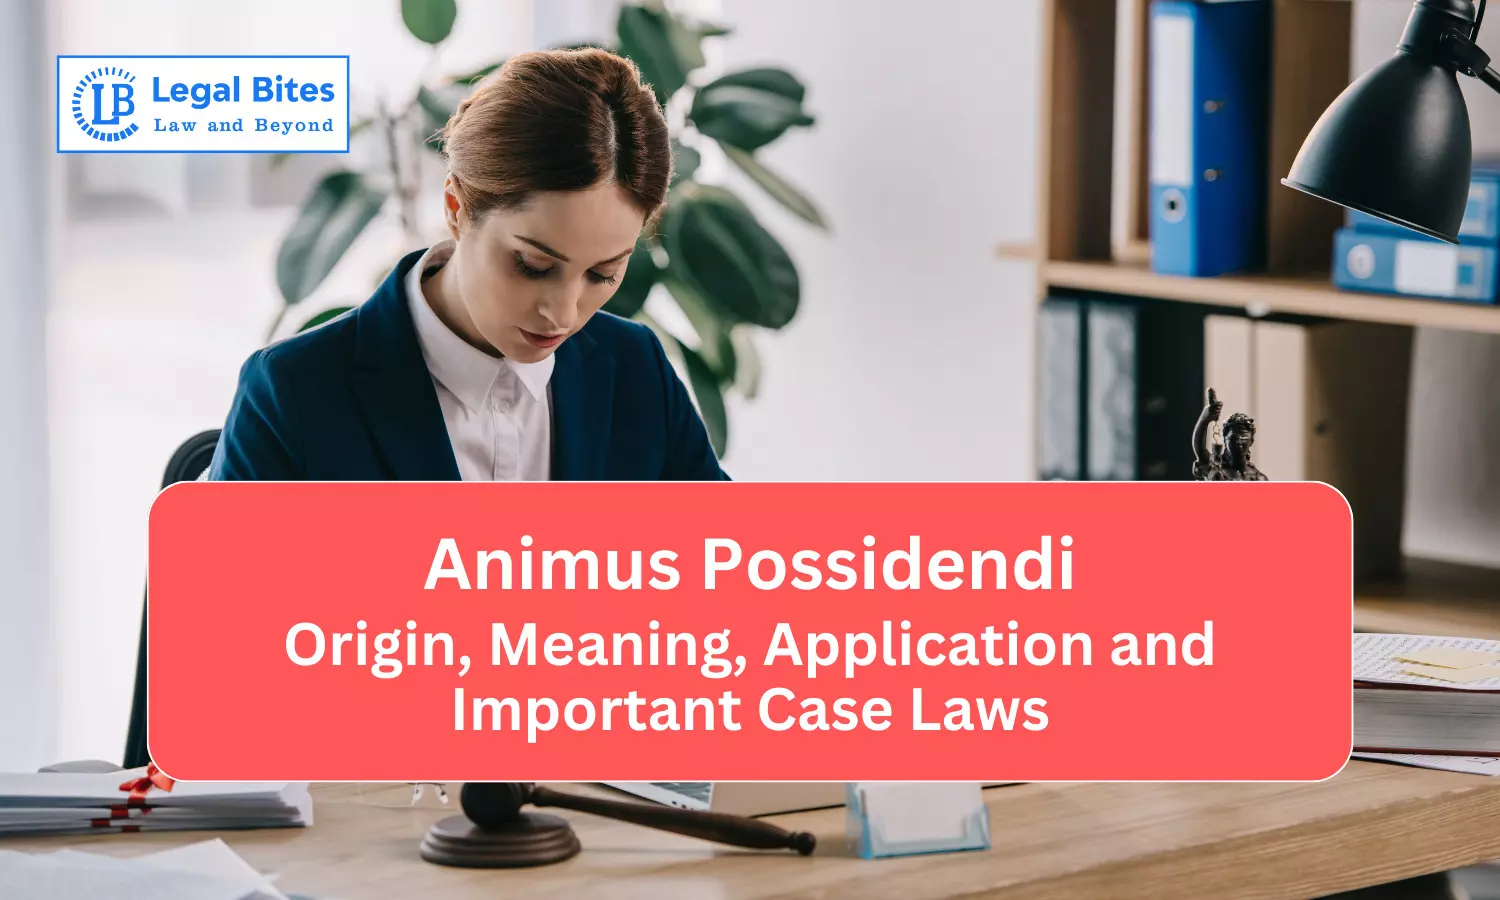 Animus Possidendi: Origin, Meaning, Application and Important Case Laws